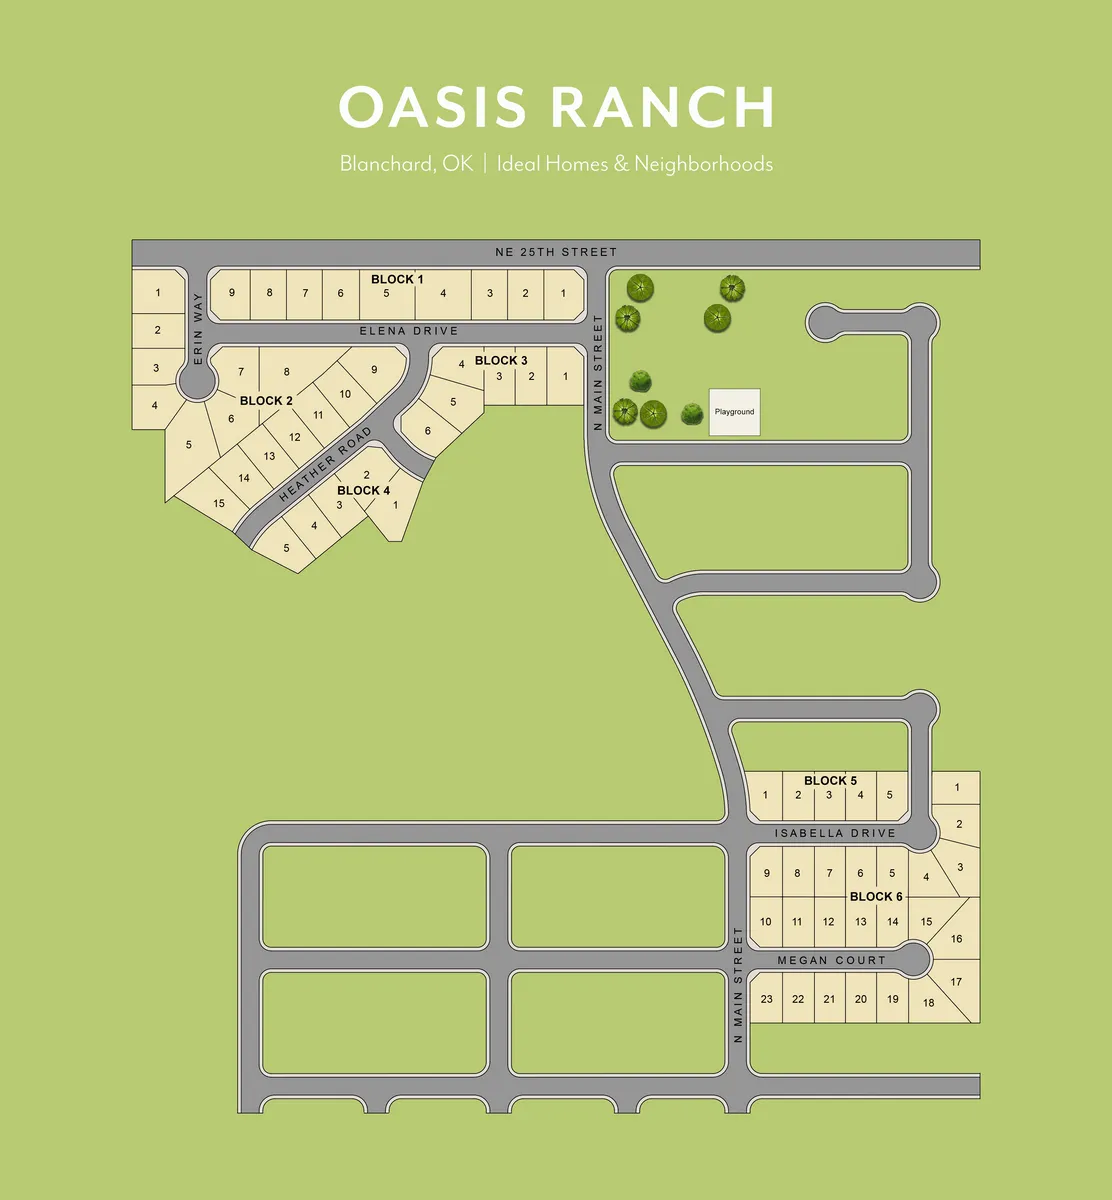 About  the oasis ranch